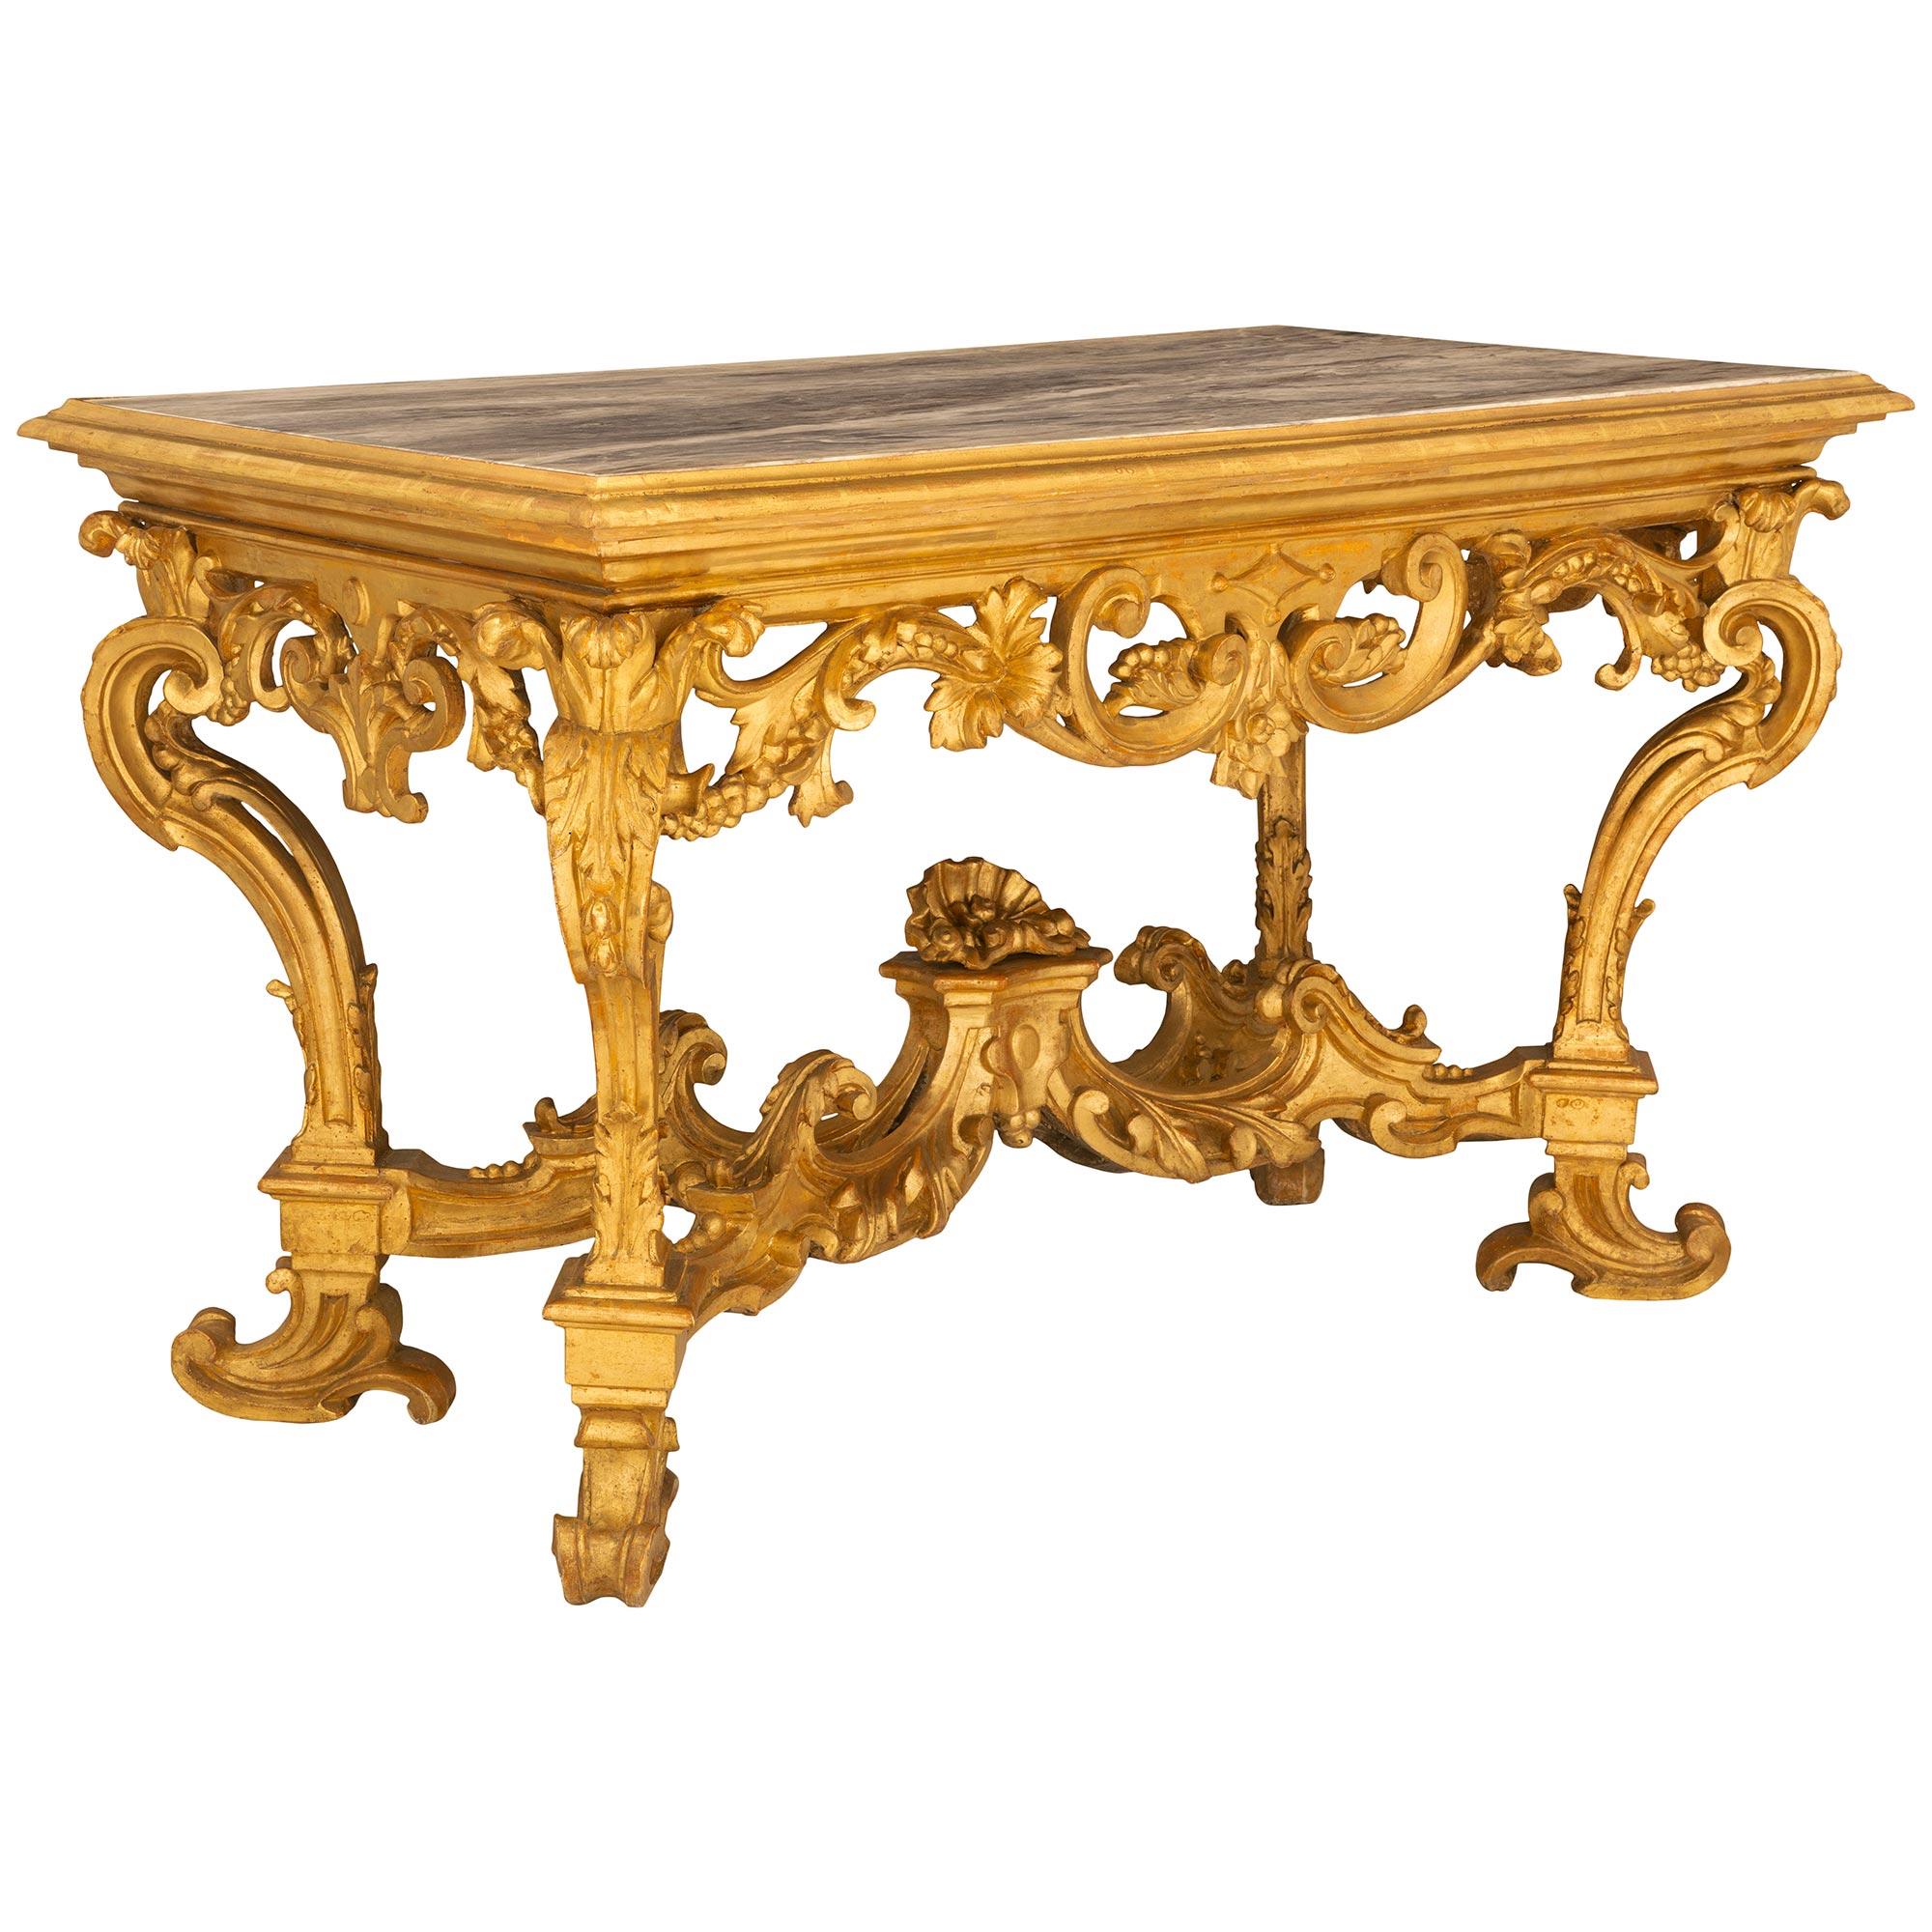 Italian Early 18th Century Louis XIV Period Giltwood and Marble Console In Good Condition For Sale In West Palm Beach, FL